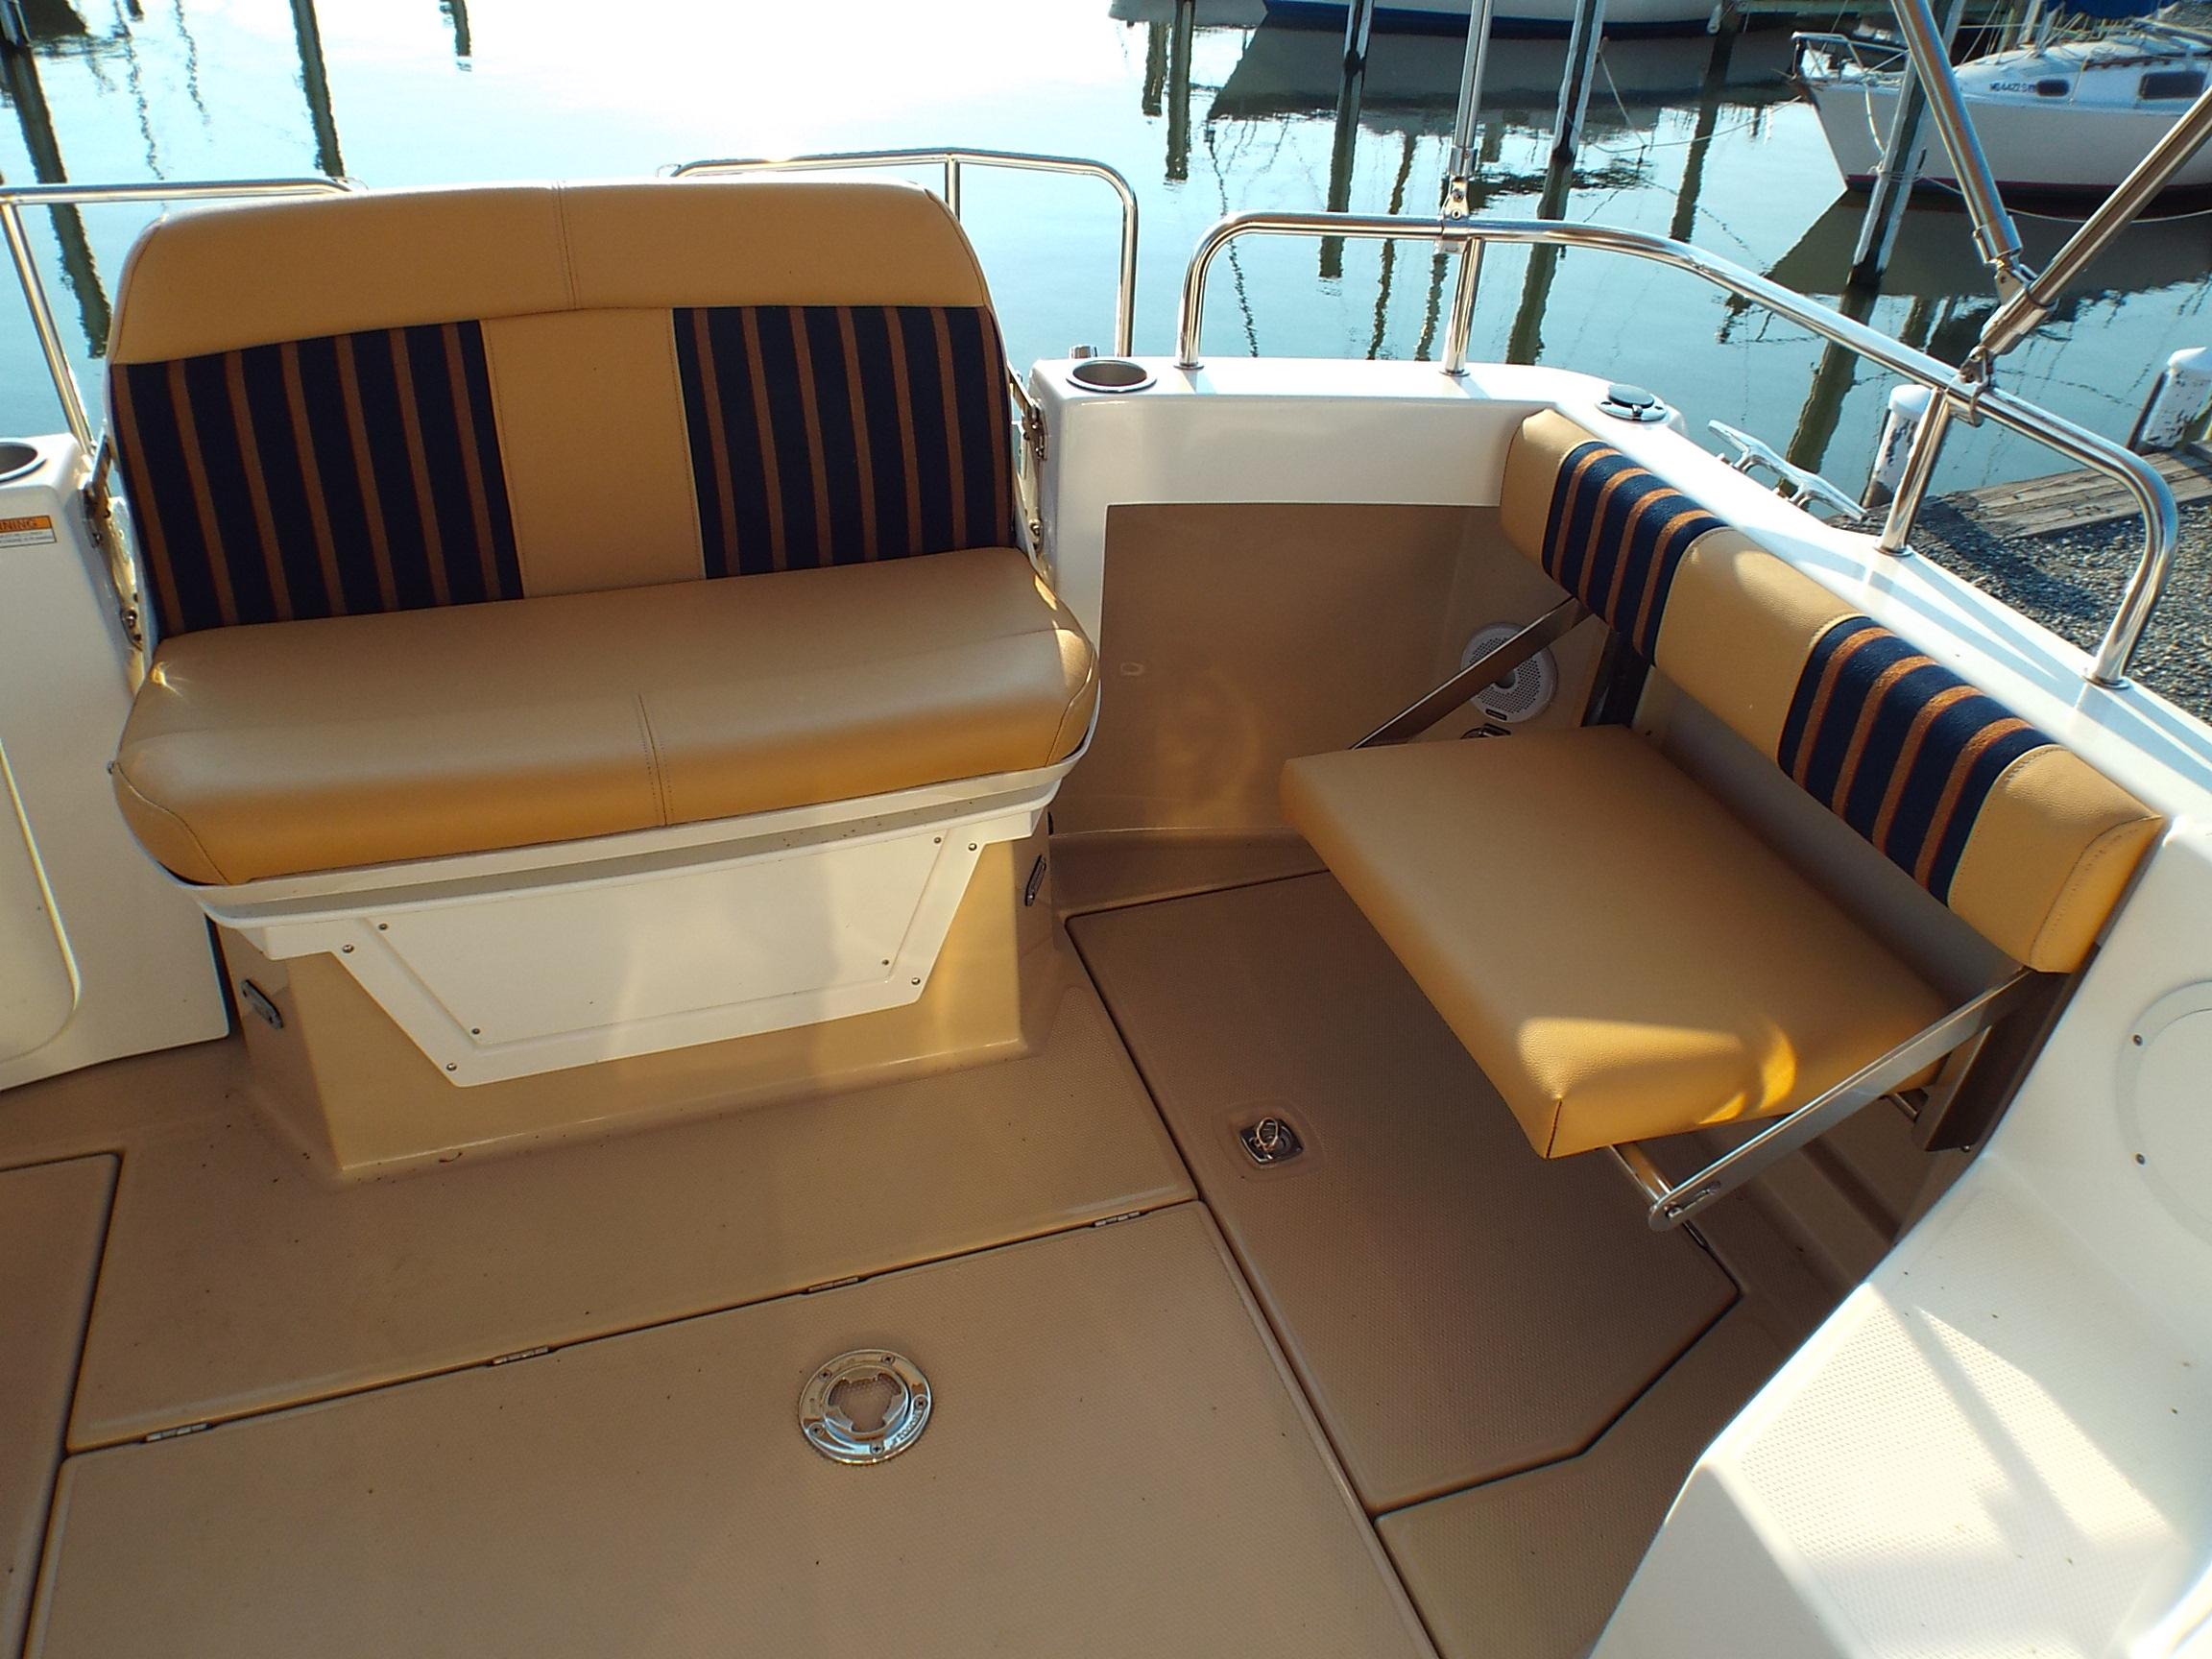 Port aft seat and mid seat looking forward